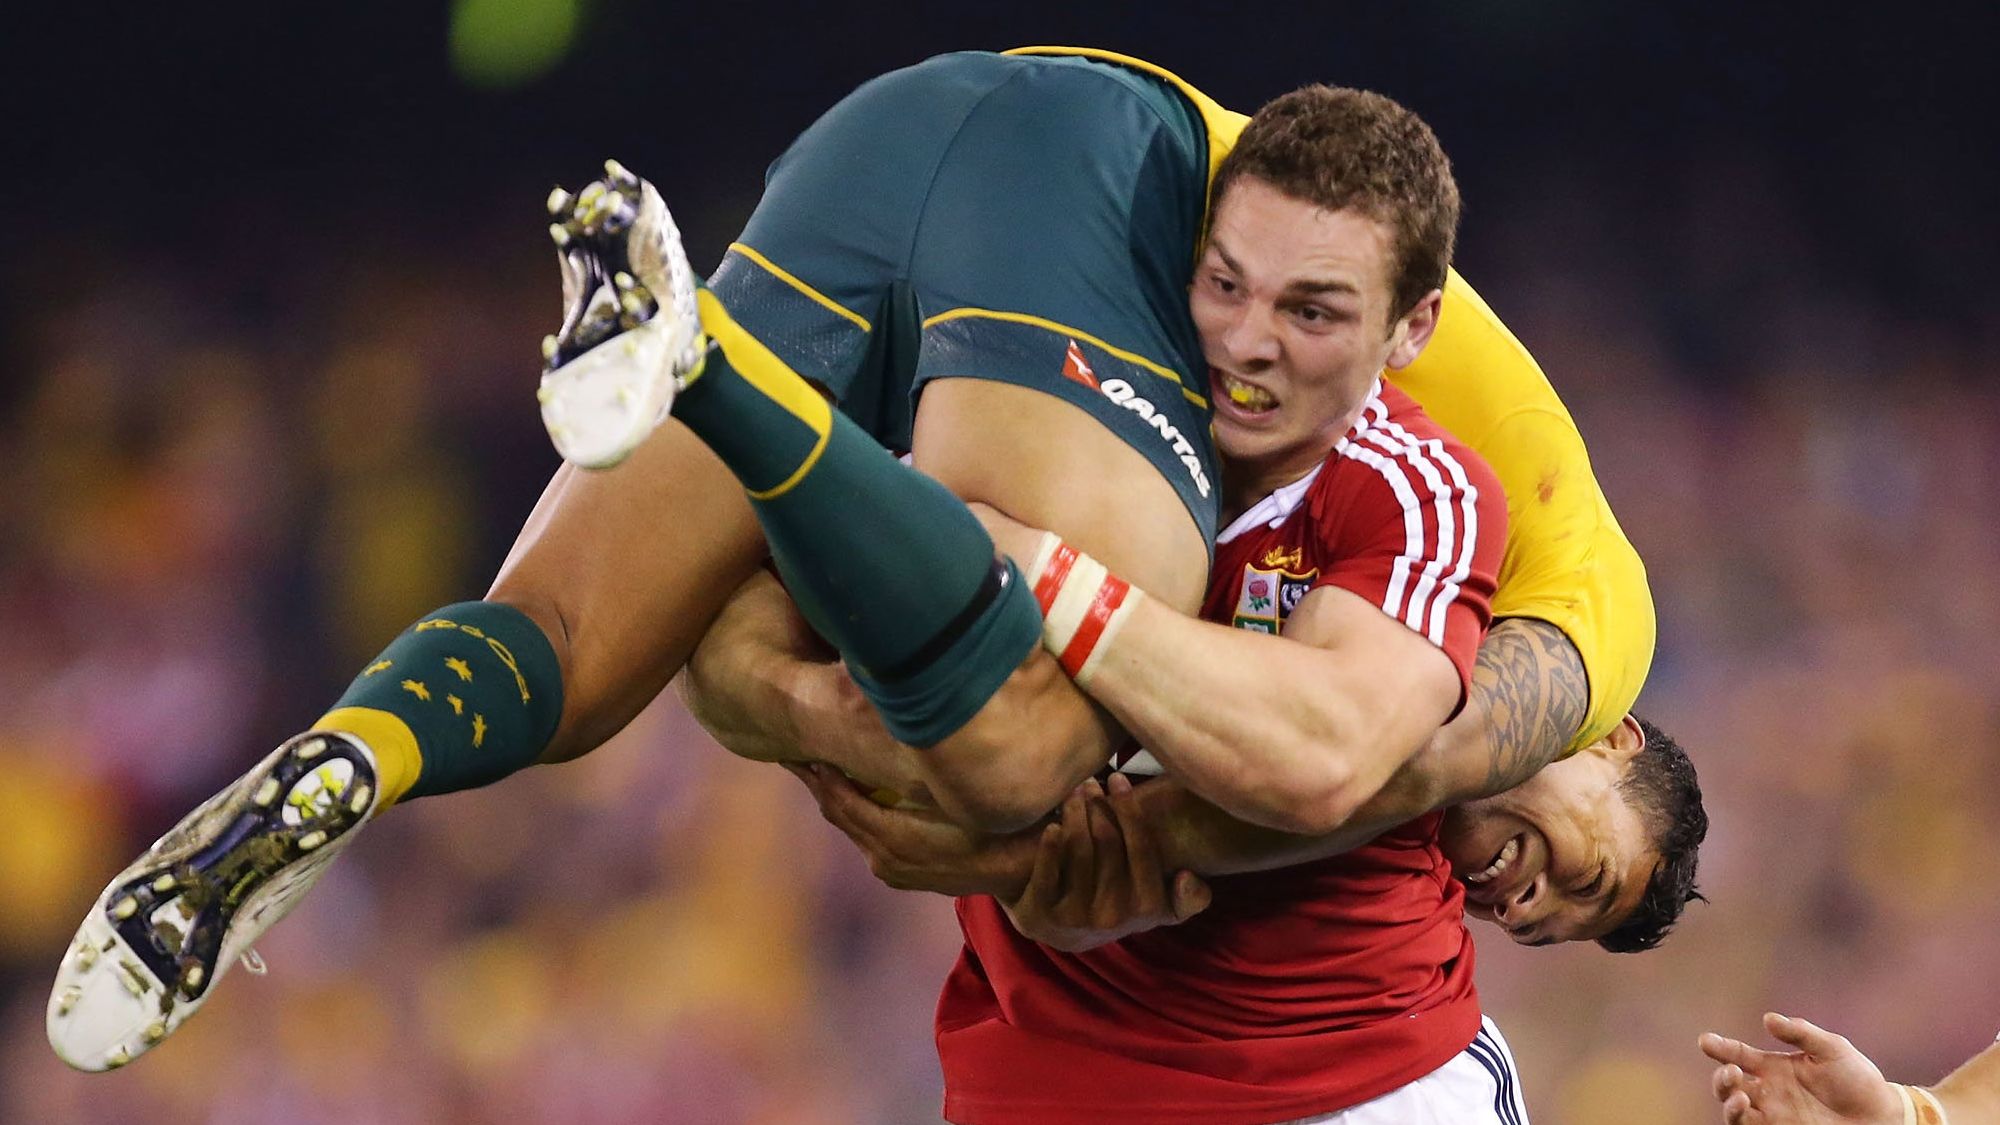 George North of the Lions lifts Israel Folau while carrying the ball during game two of the 2013 Test series against the Wallabies in Melbourne.